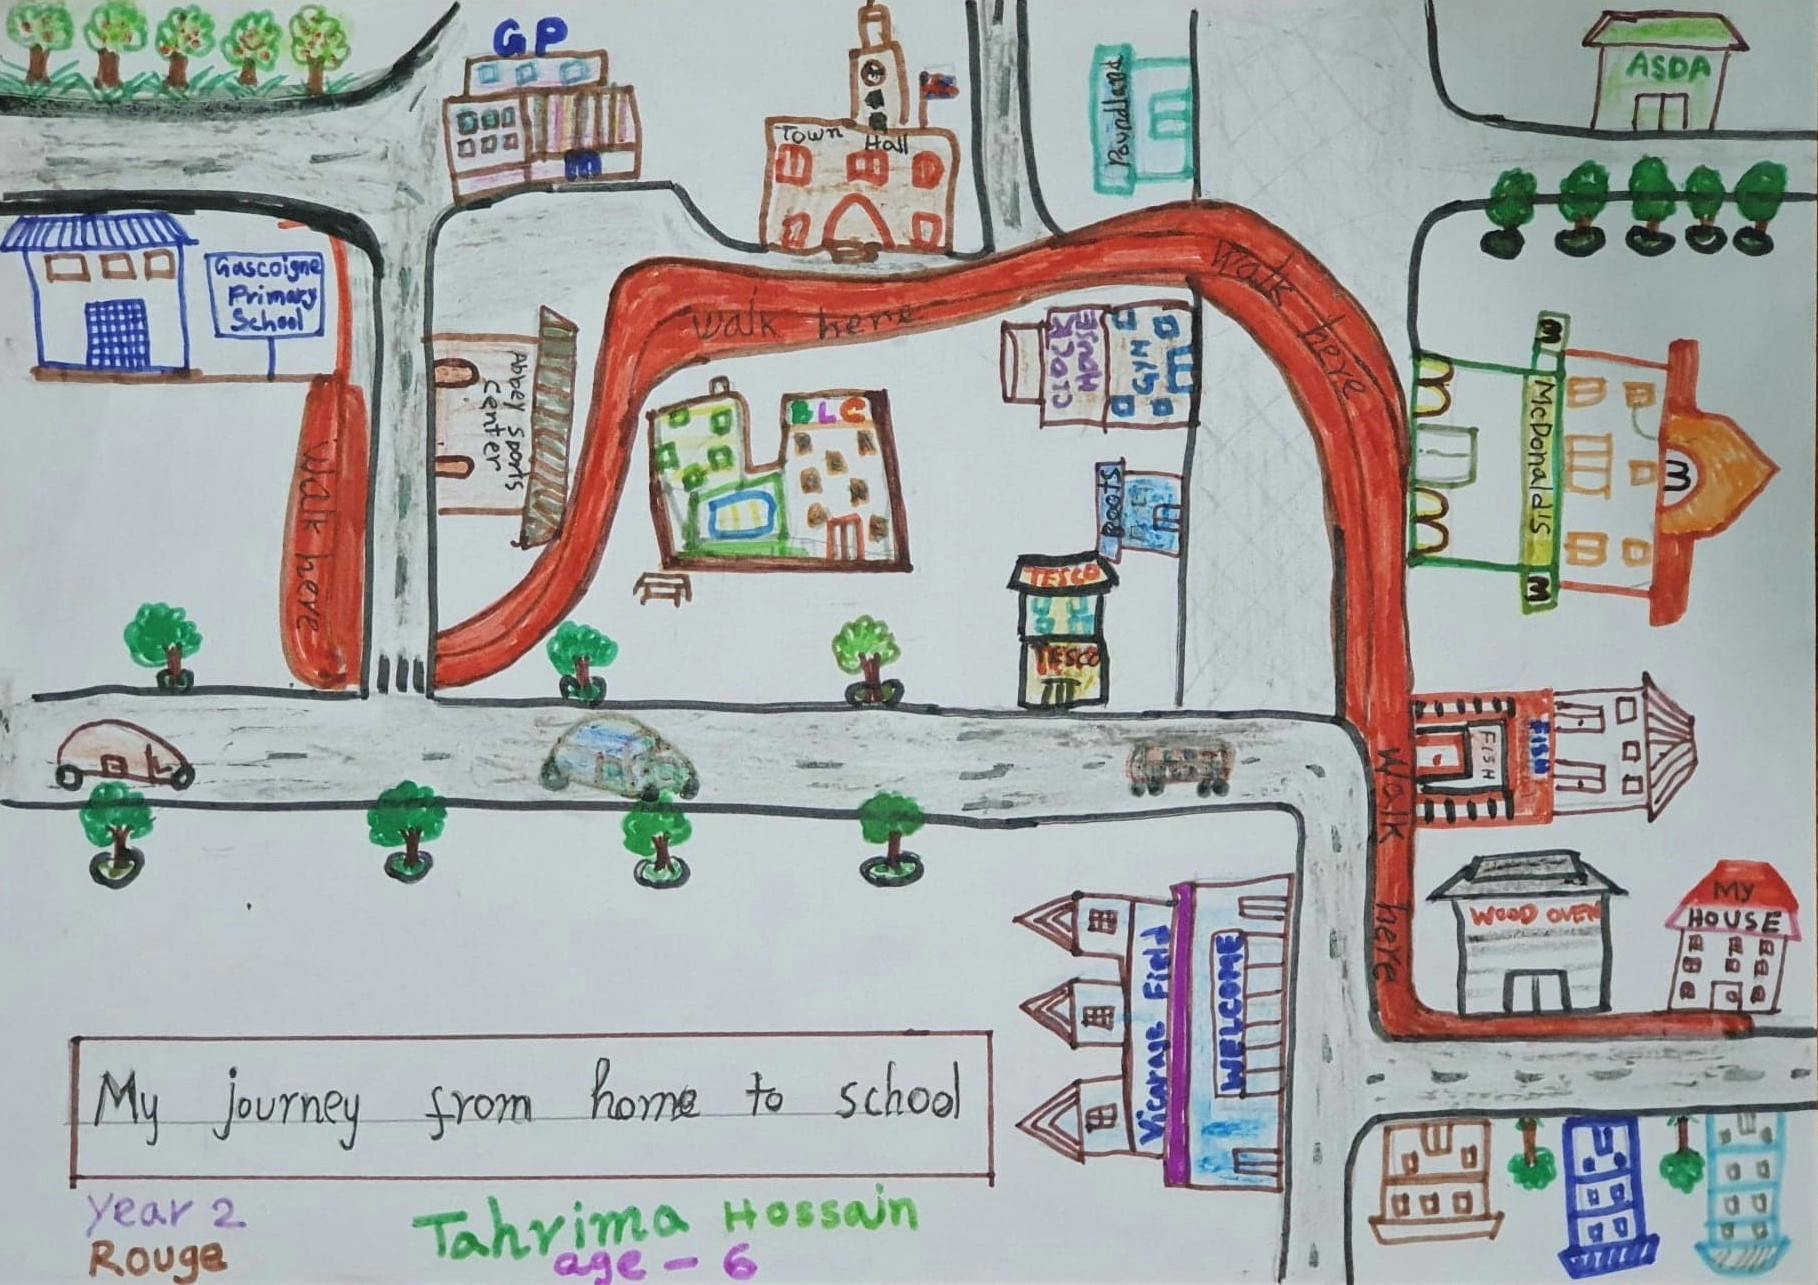 My journey from home to school by Tahrima Hossain